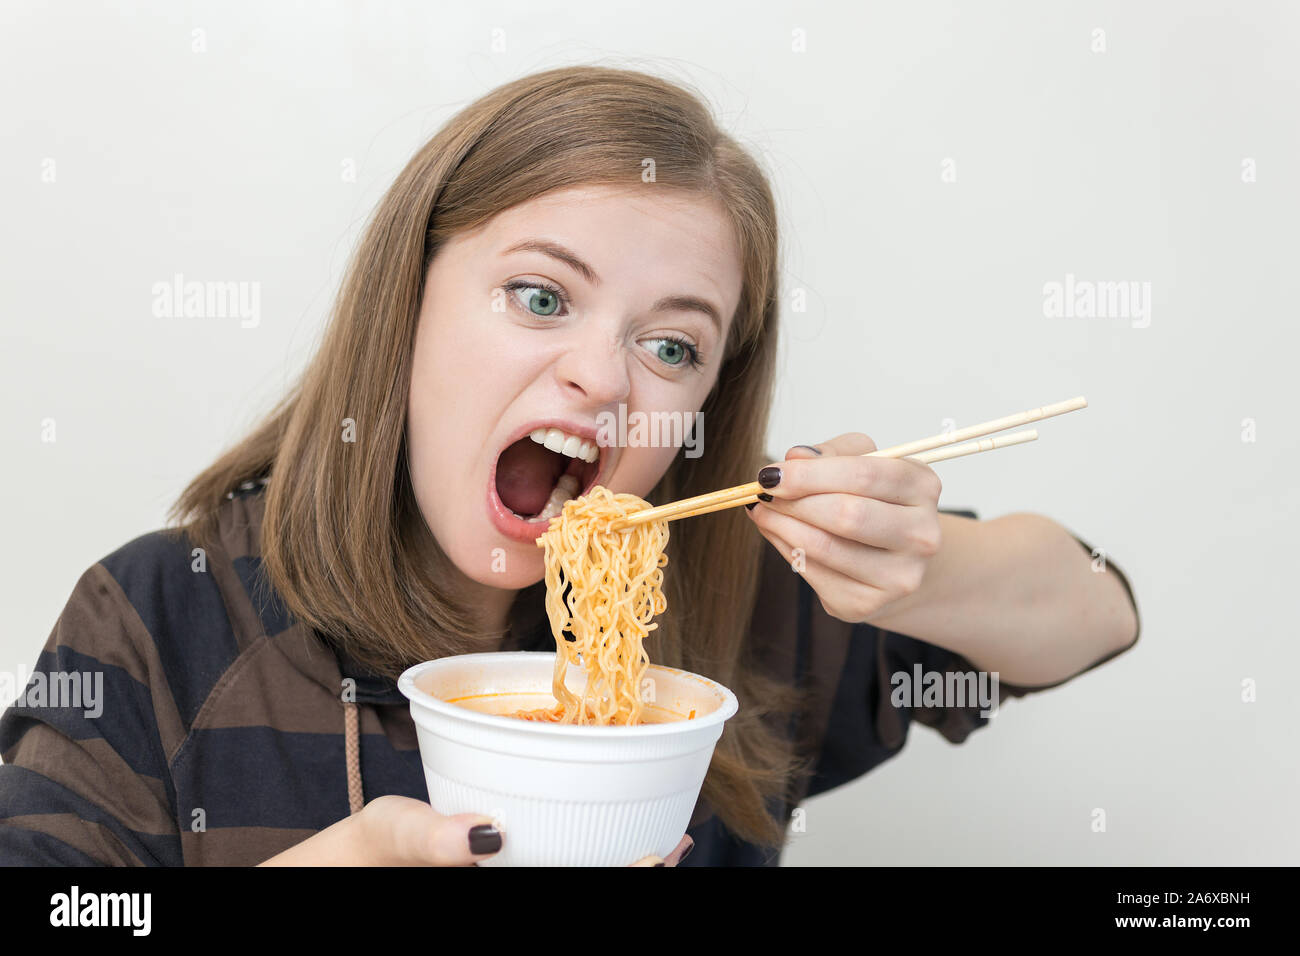 Young caucasian girl woman eating instant ramen noodles with chopsticks Banque D'Images